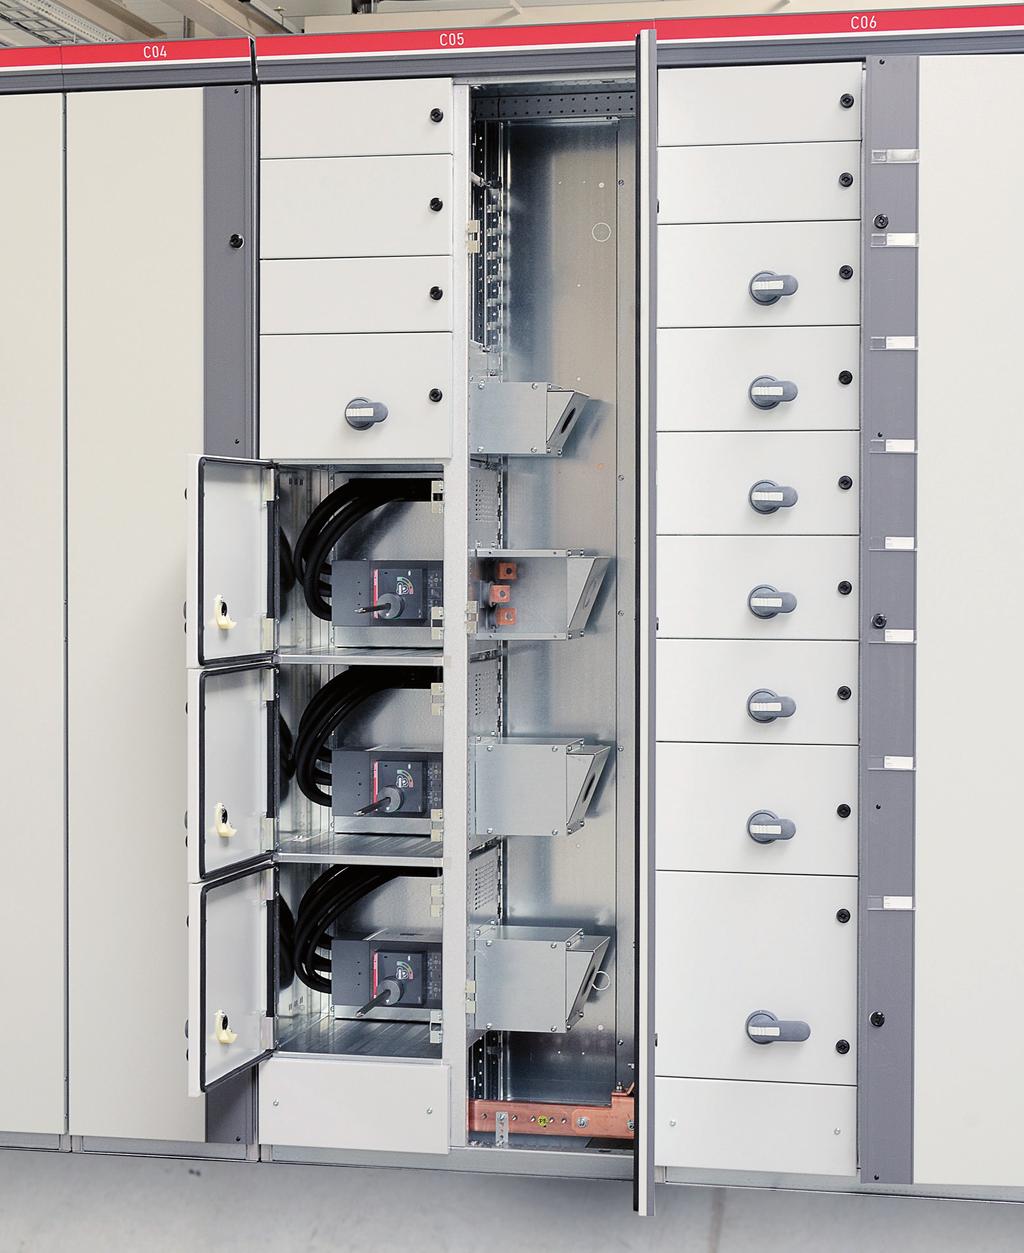 Compact, reliable and safe, ABB s highperformance PowerCenter is the ideal solution to focus on customer needs by extending the power distribution portfolio.